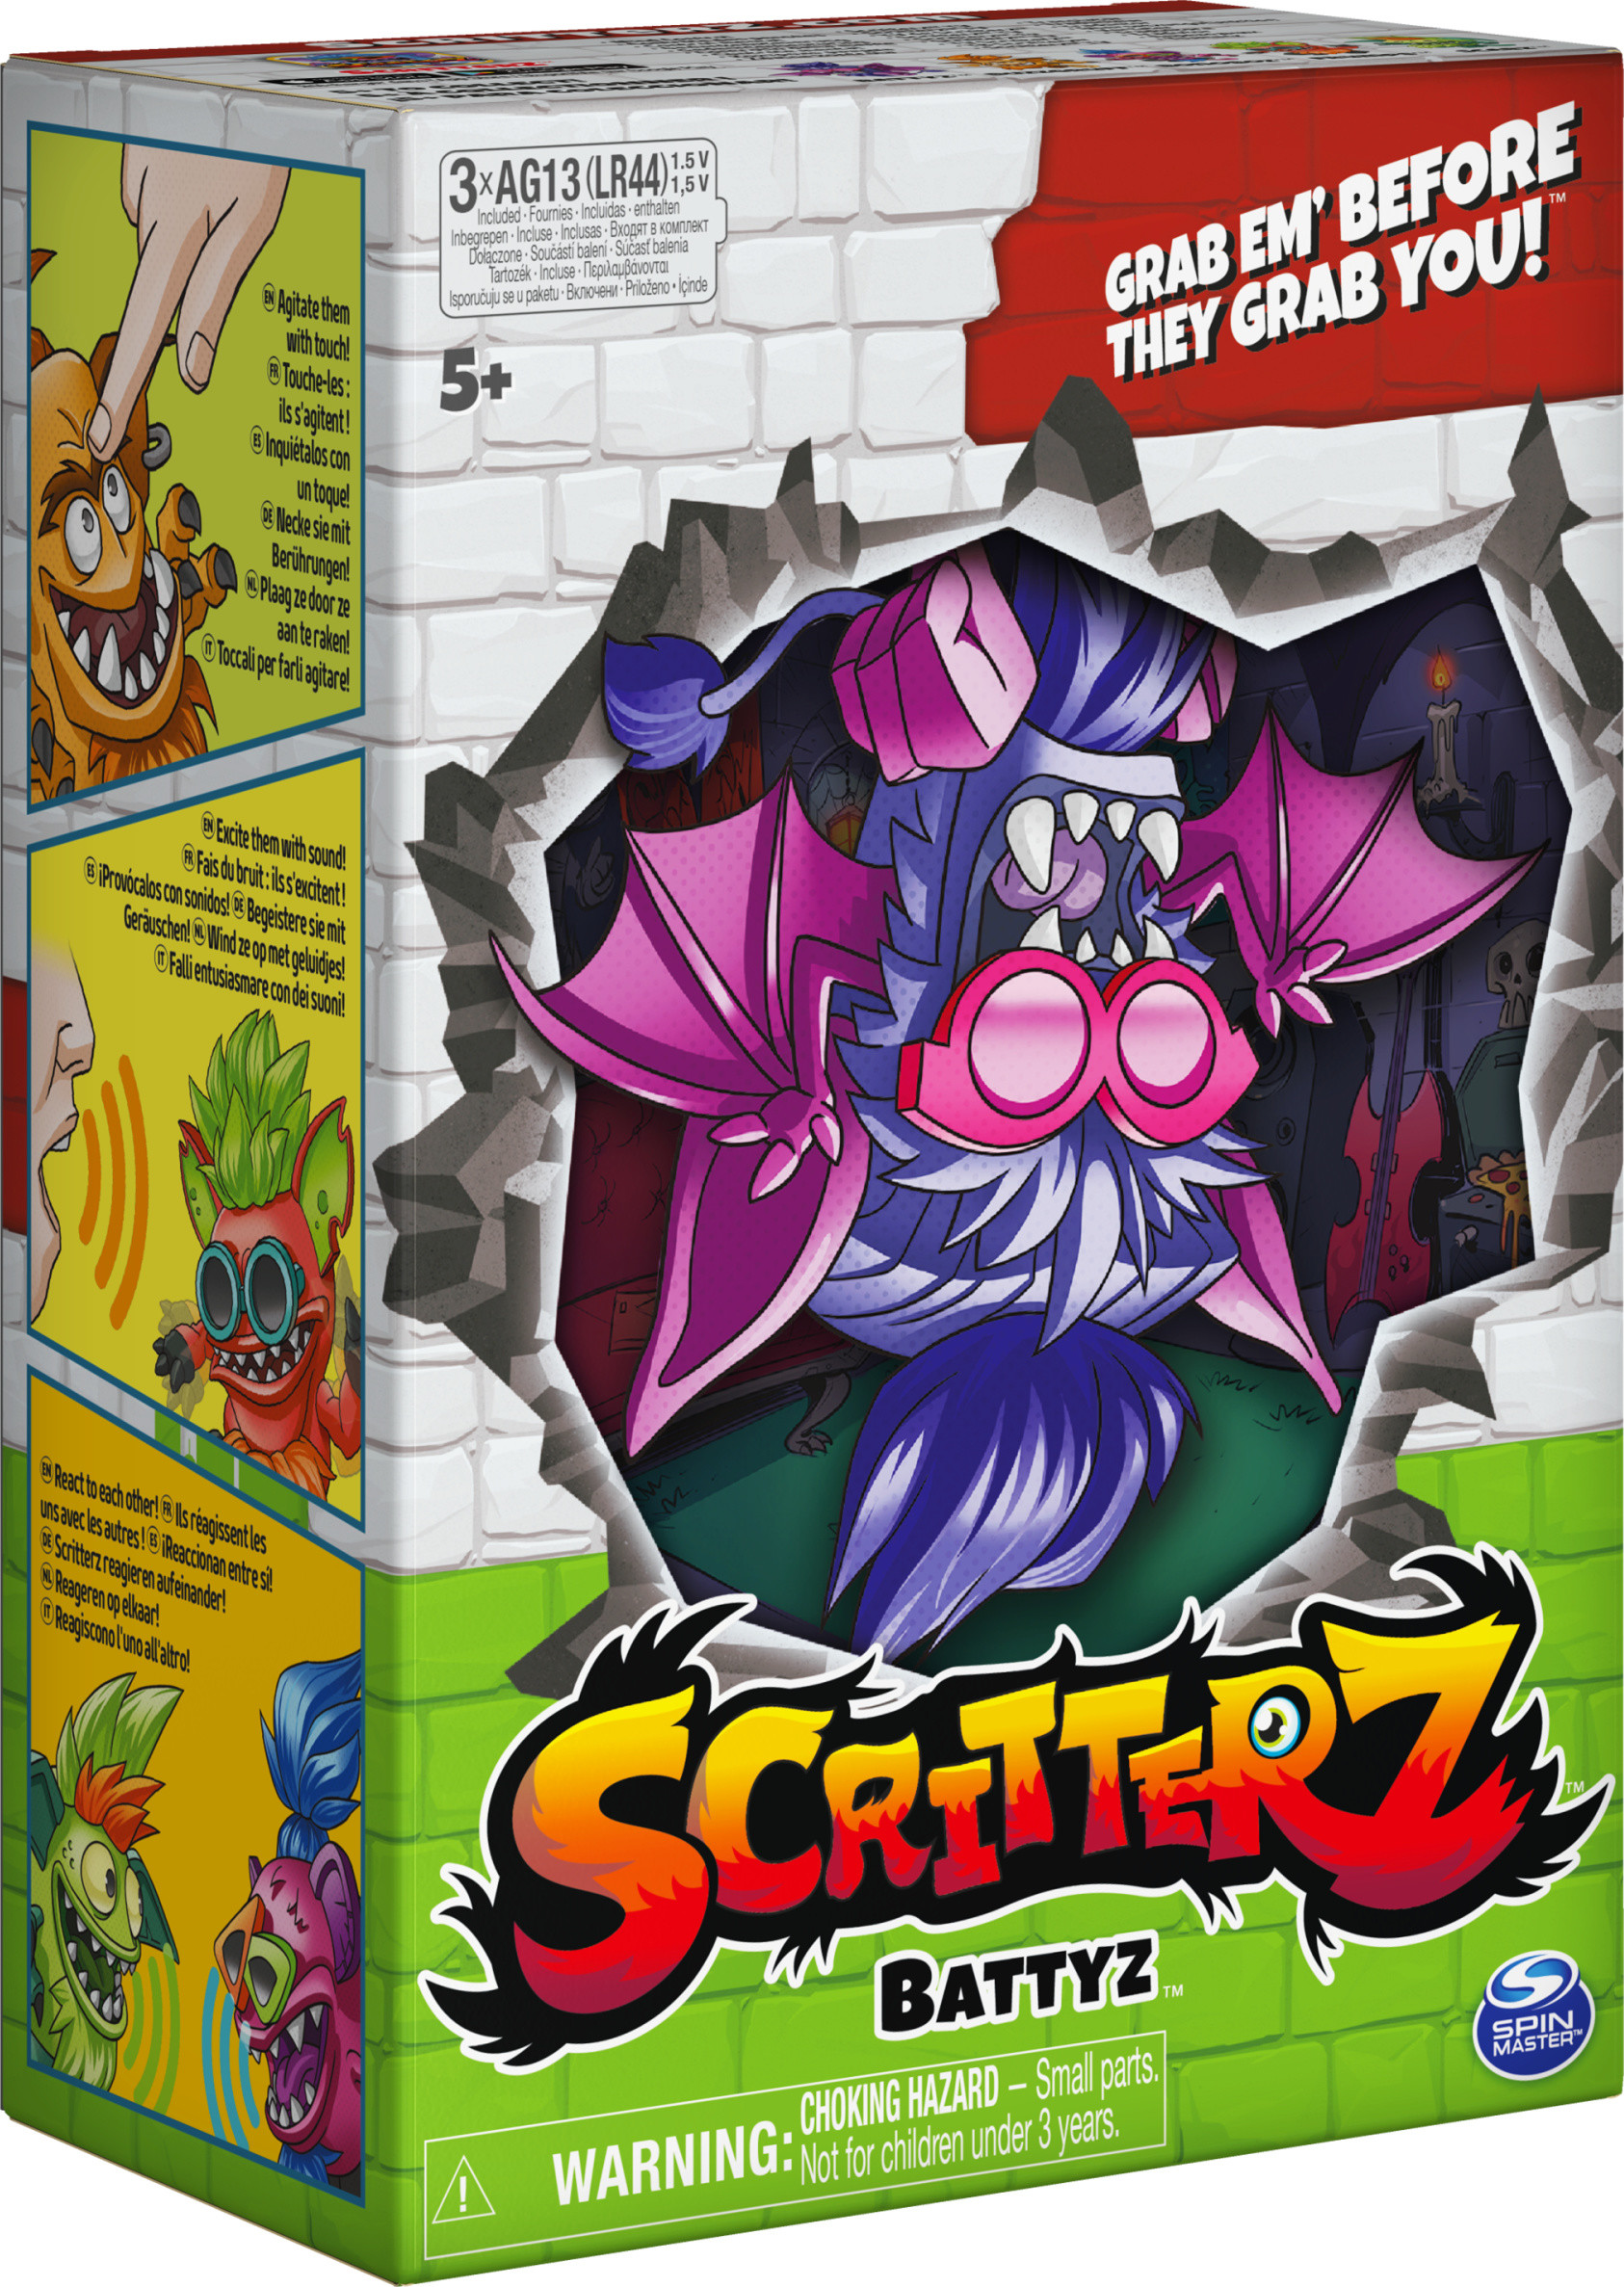 Scritterz, Battyz Interactive Collectible Jungle Creature Toy with Sounds and Movement, for Kids Aged 5 and up - image 8 of 8